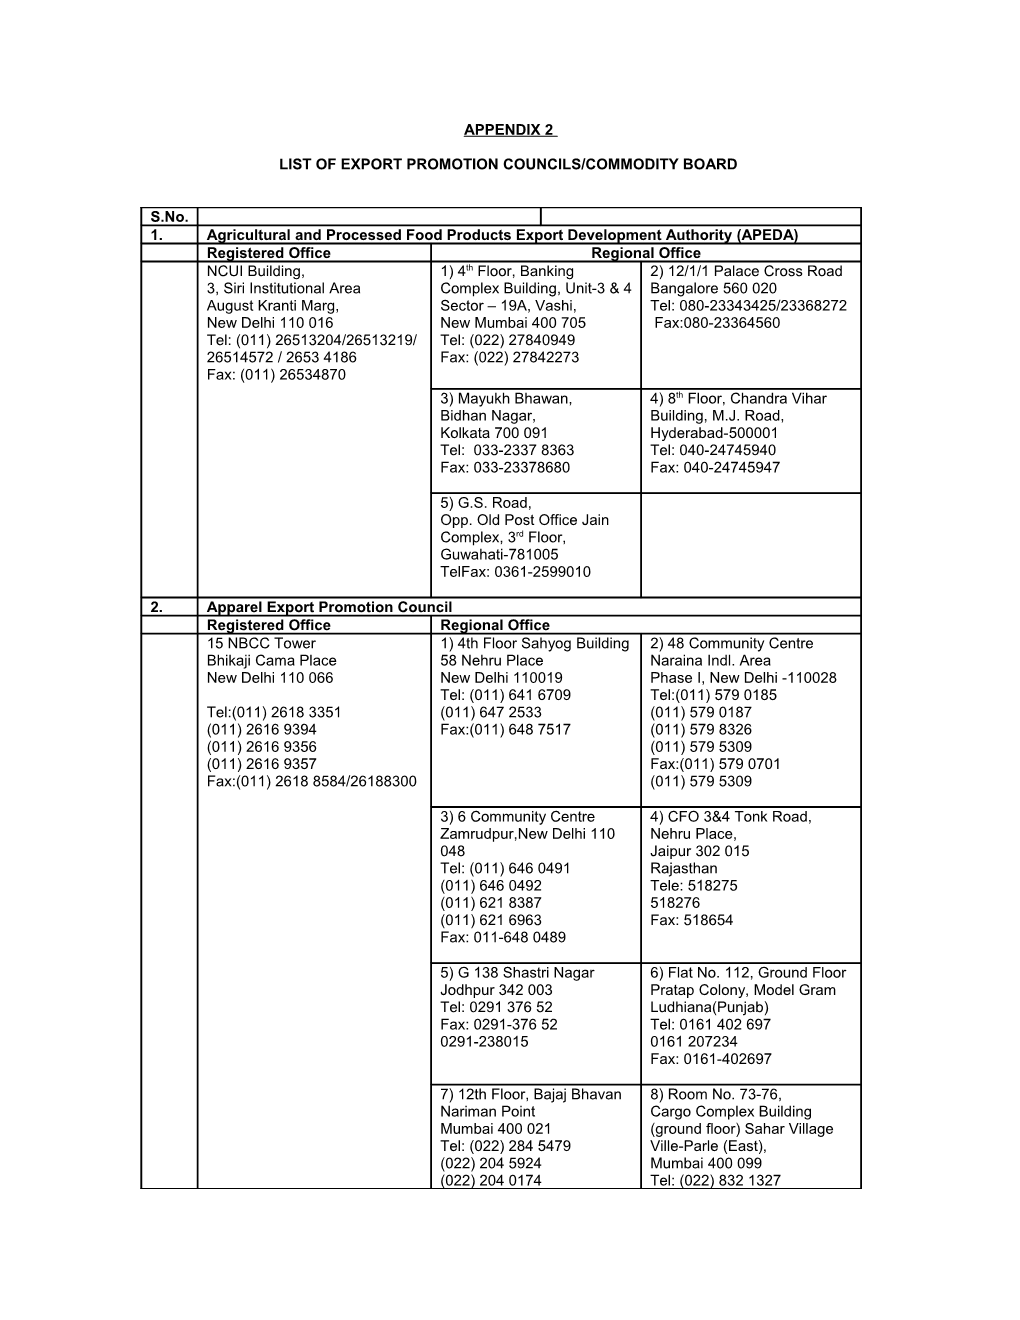 List of Export Promotion Councils/Commodity Board